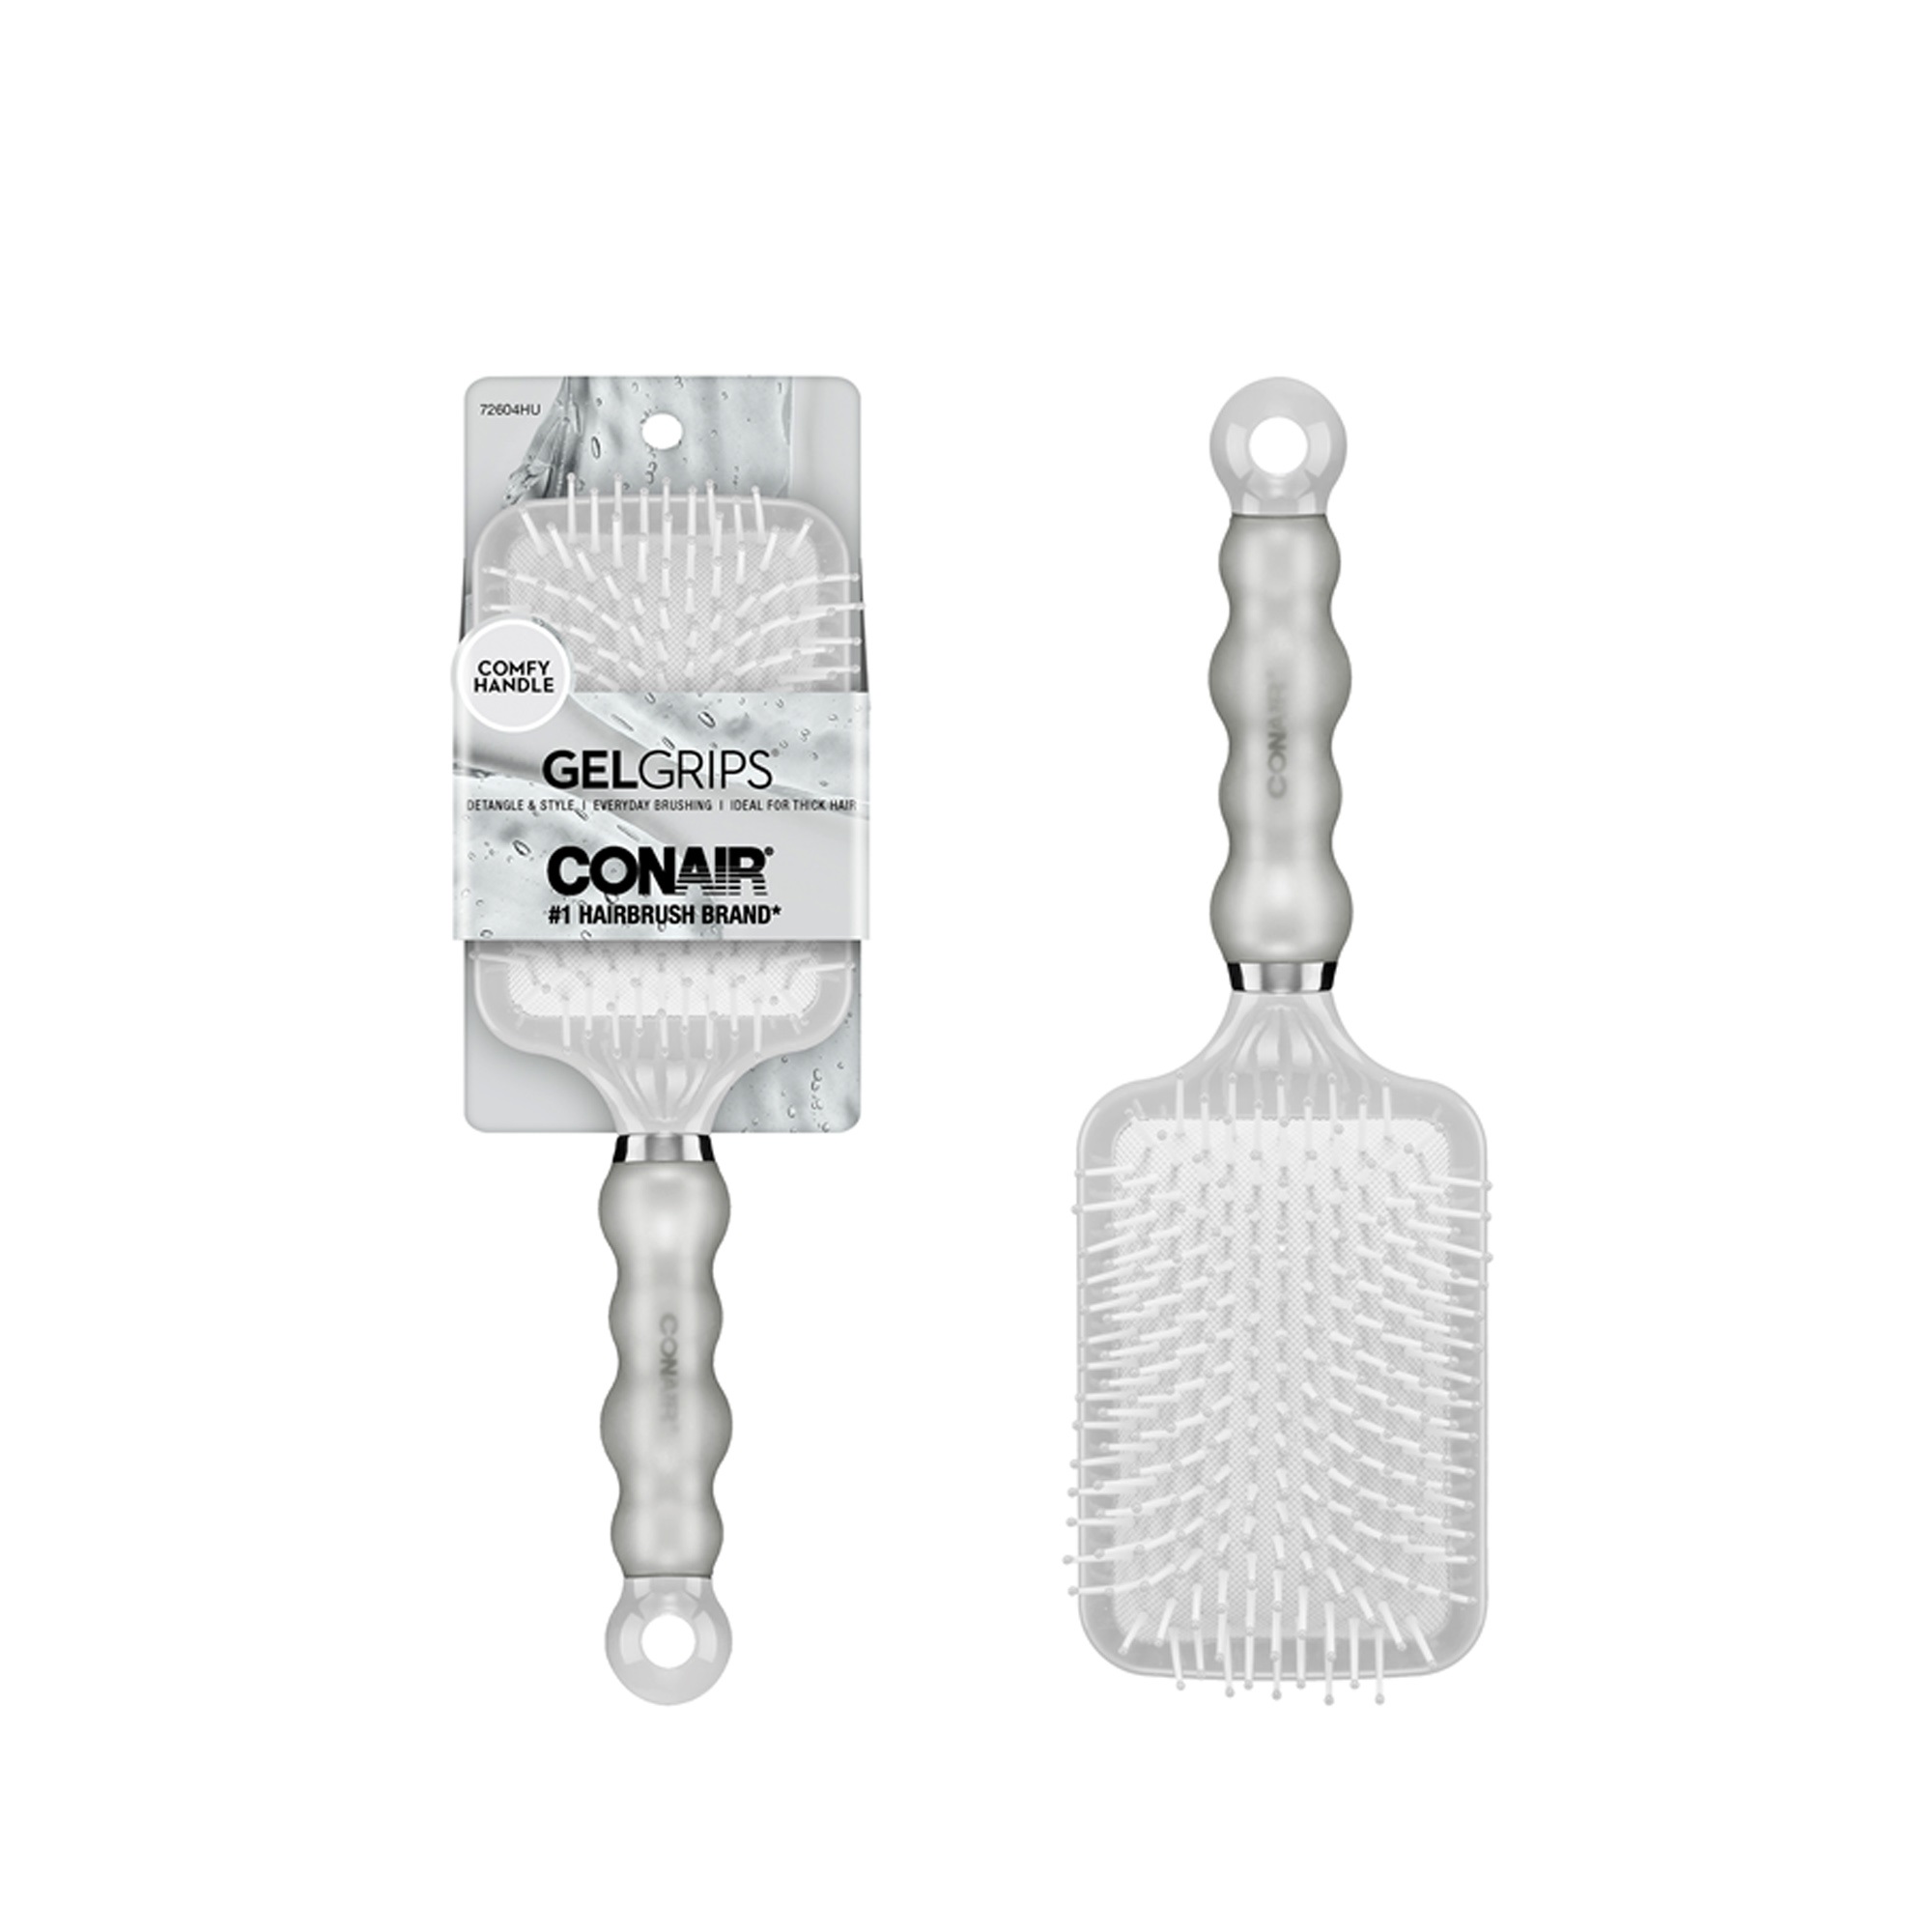 Conair Gel Grip Nylon Bristle Paddle Hairbrush with Comfy Handle, Colors Vary - image 4 of 8